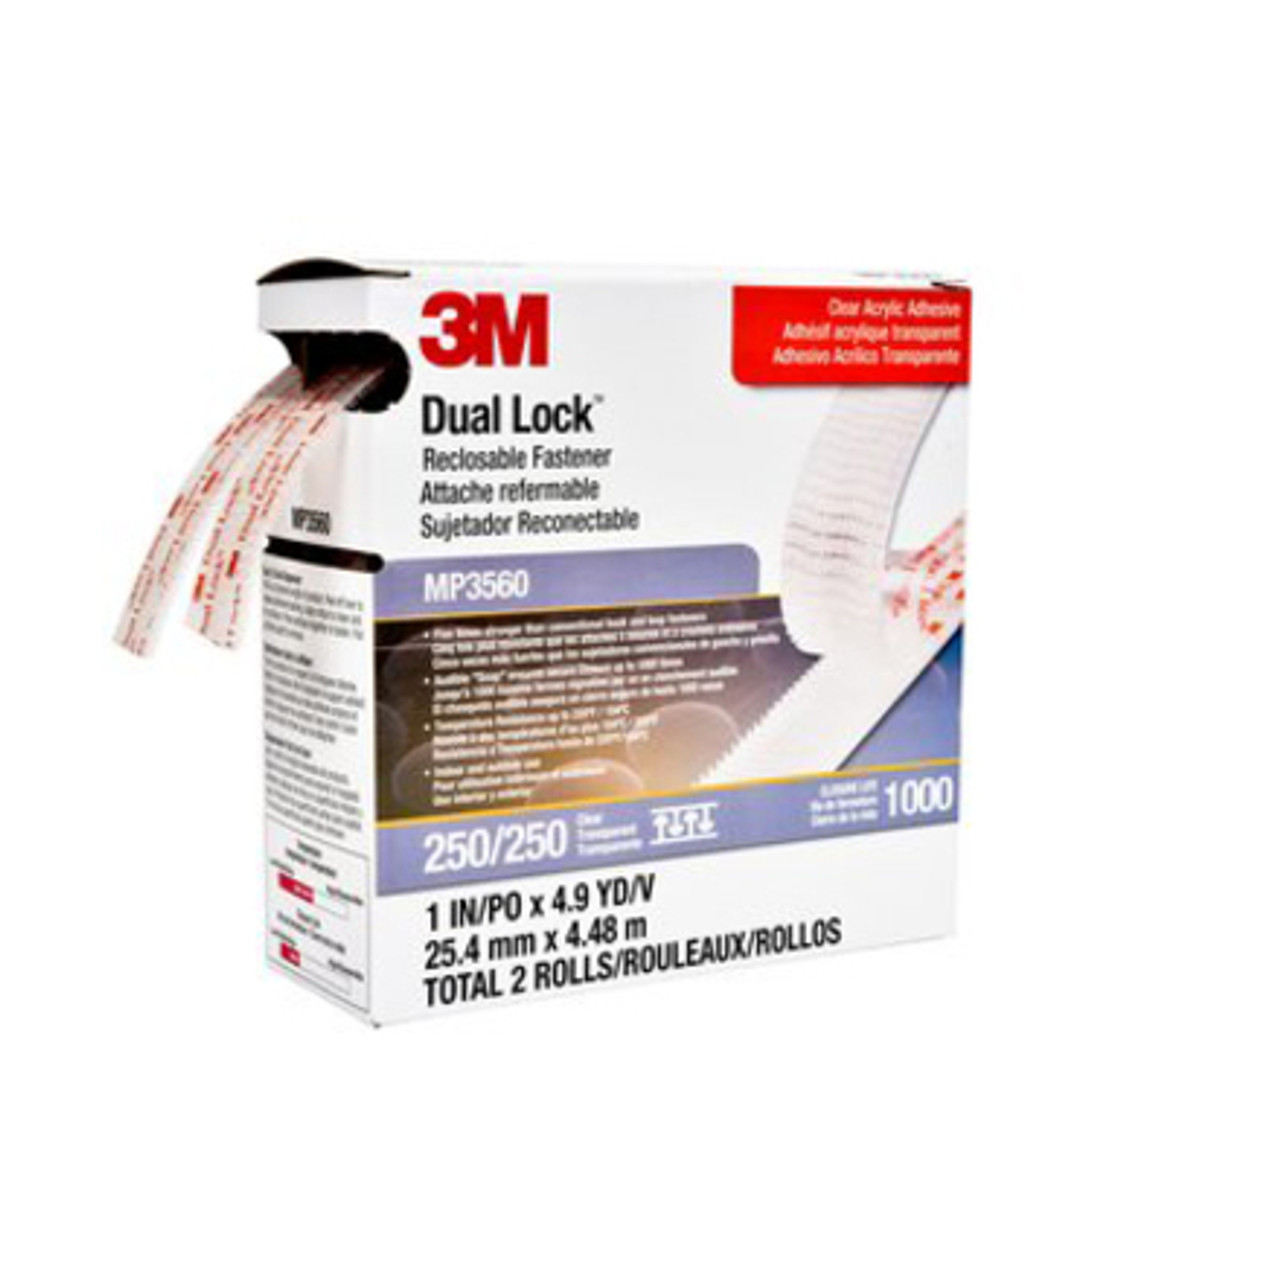 3M Dual Lock Reclosable Fasteners, Clear, 1 x 1-In.